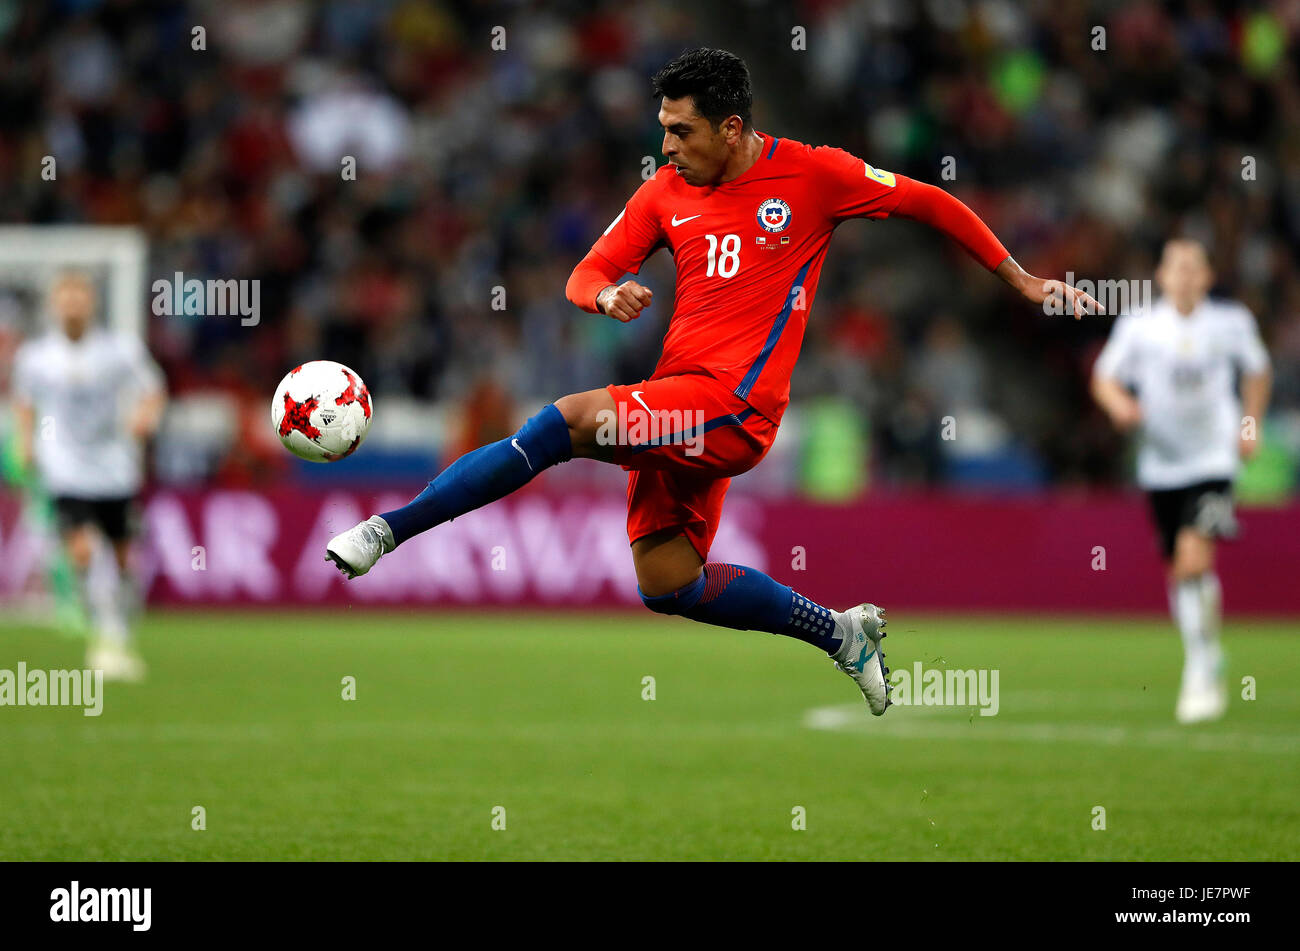 Kazan, Russia. 22nd Jun, 2017. Gonzalo JARA of Chile during a match between Germany and Chile valid for the second round of the Confederations Cup 2017 on Thursday (22), held at the Kazan Arena in Kazan, Russia. Credit: Foto Arena LTDA/Alamy Live News Stock Photo